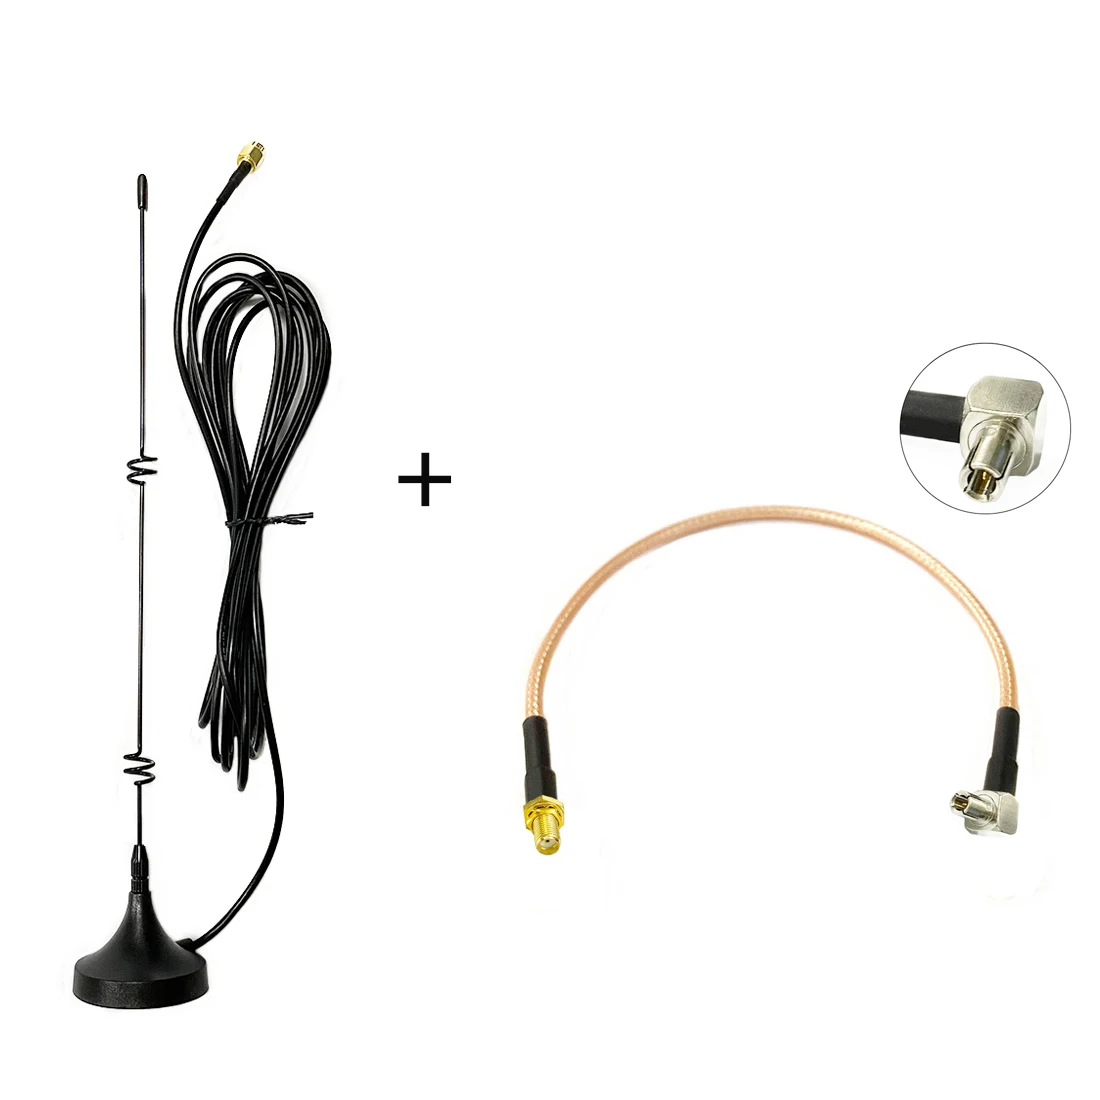 4G 3G GSM Antenna 6dbi High Gain Magnetic Base with 3meters Cable SMA Male +SMA Female Connector  to TS9 Male RG316 Cable 15cm 4g 3g gsm antenna 6dbi high gain magnetic base with 3meters cable sma male sma female connector to ts9 male rg316 cable 15cm